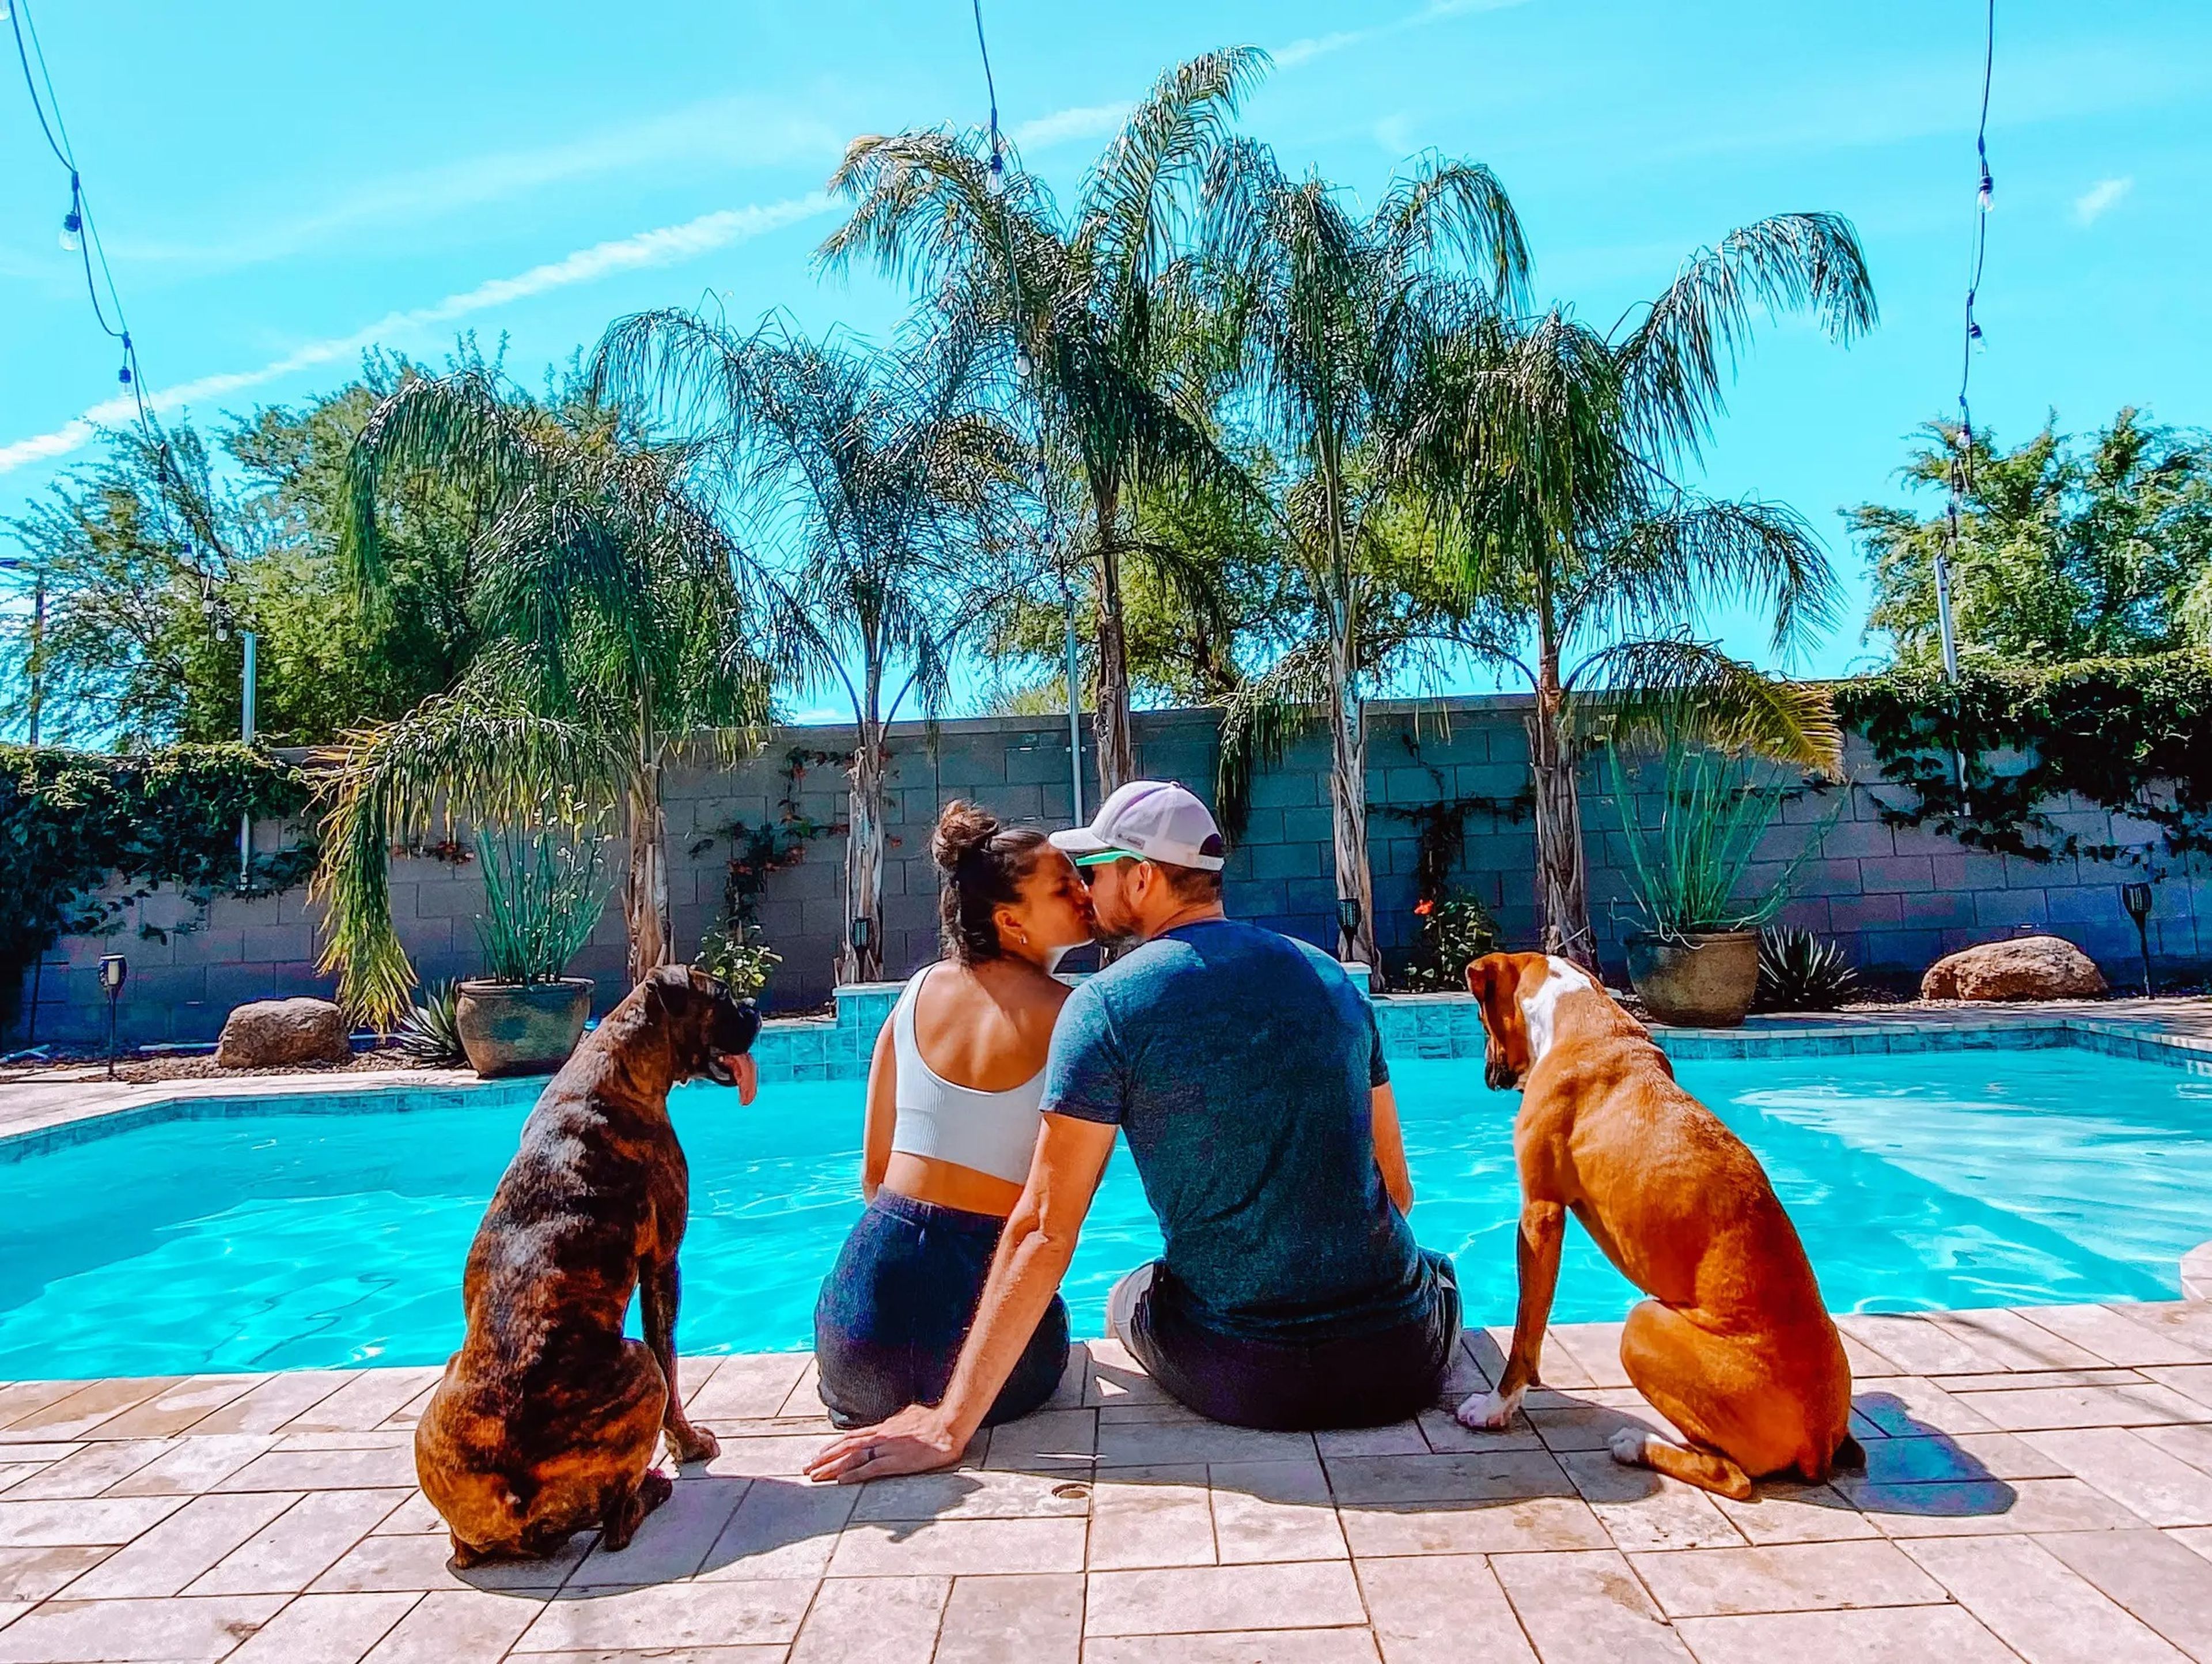 Hannah and Joseph Ryan sitting by a pool with two dogs.